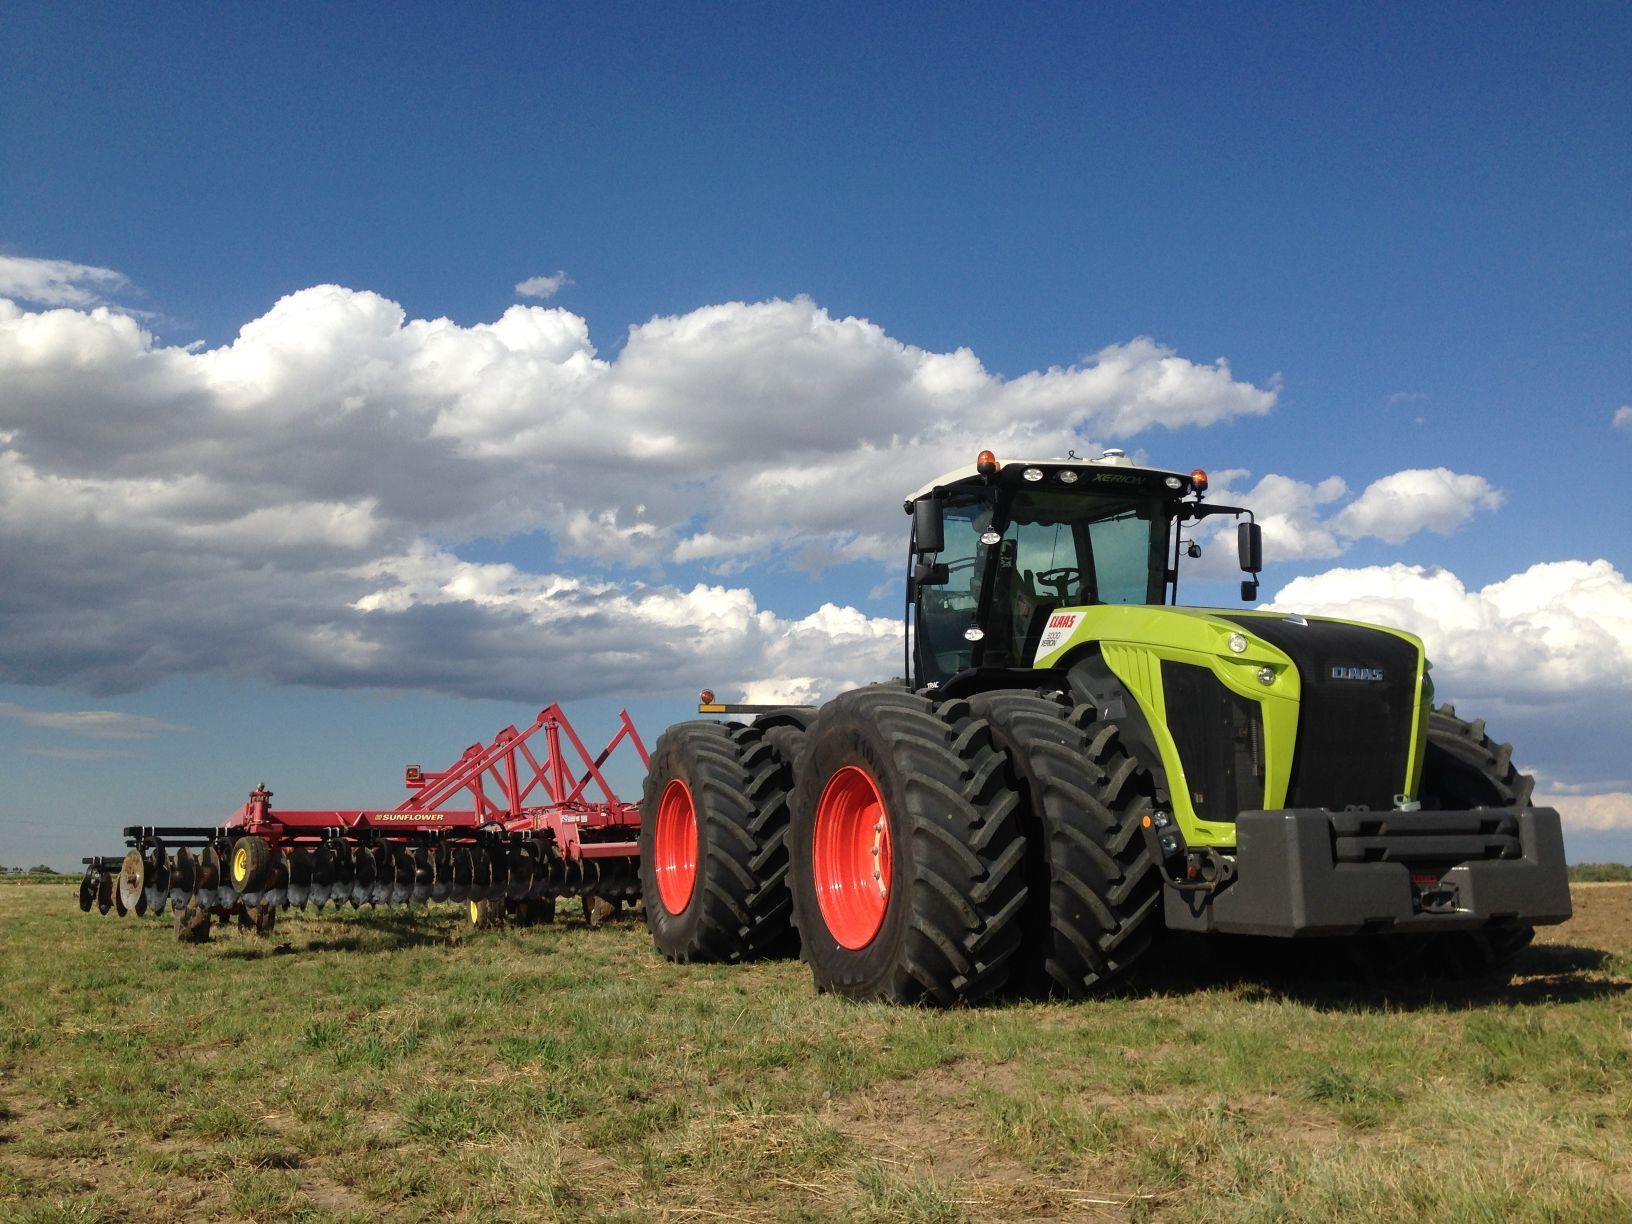 820x460px Awesome Claas image 69